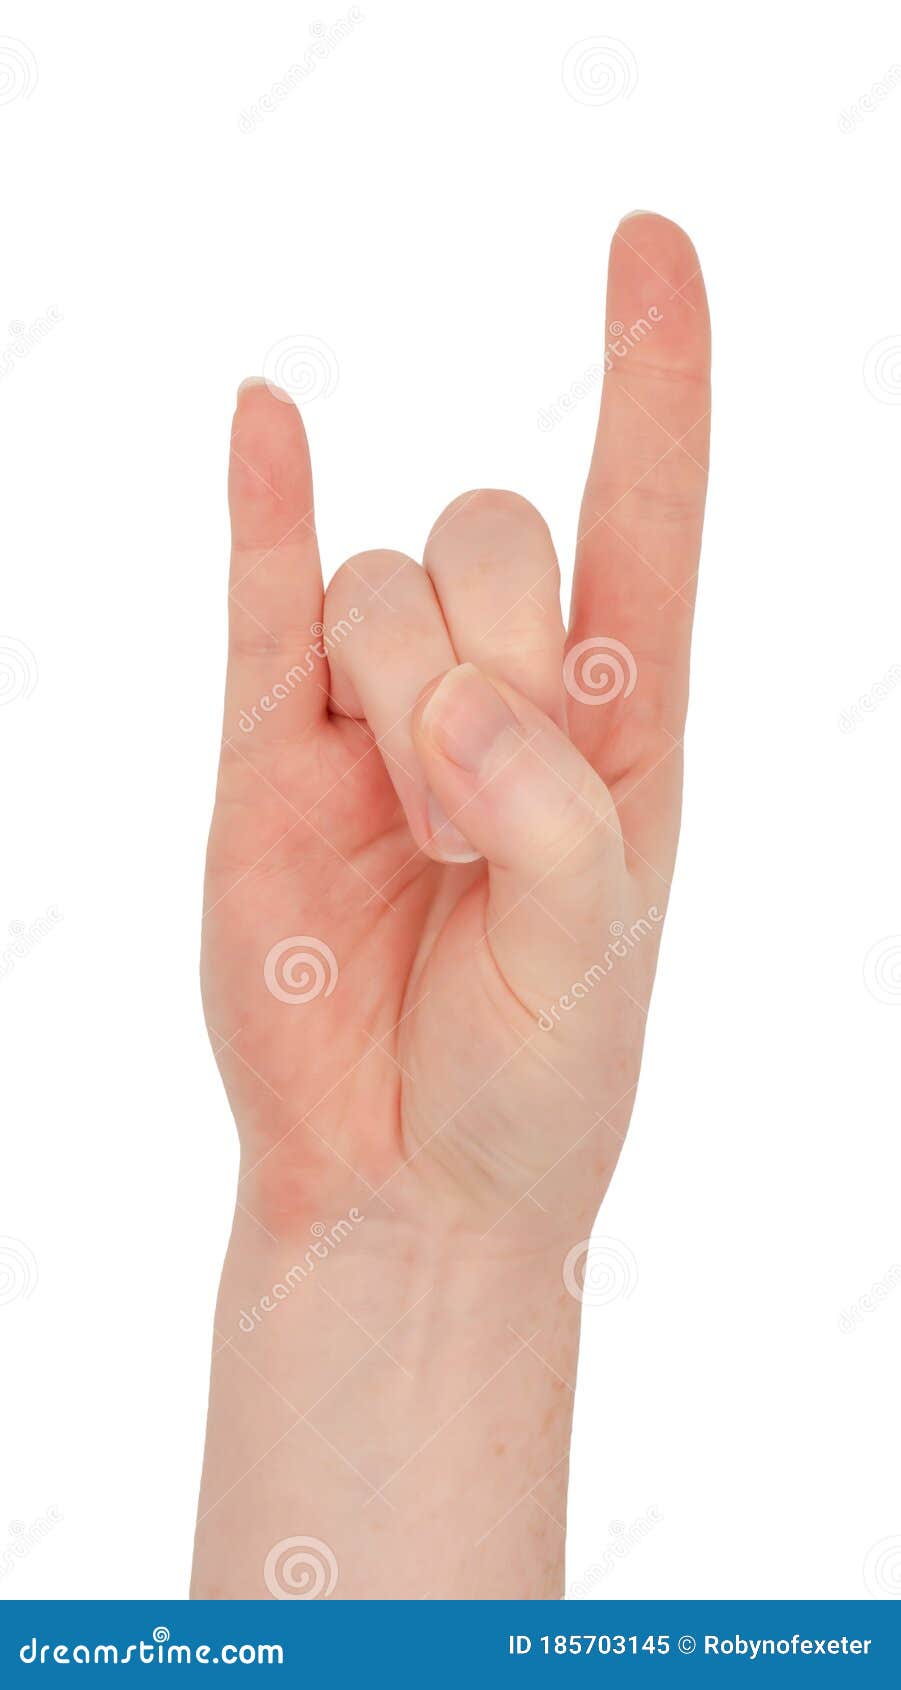 freckled white hand.  woman`s hand in a horns gesture palm up, middle and ring fingers tucked into the palm by the thumb,